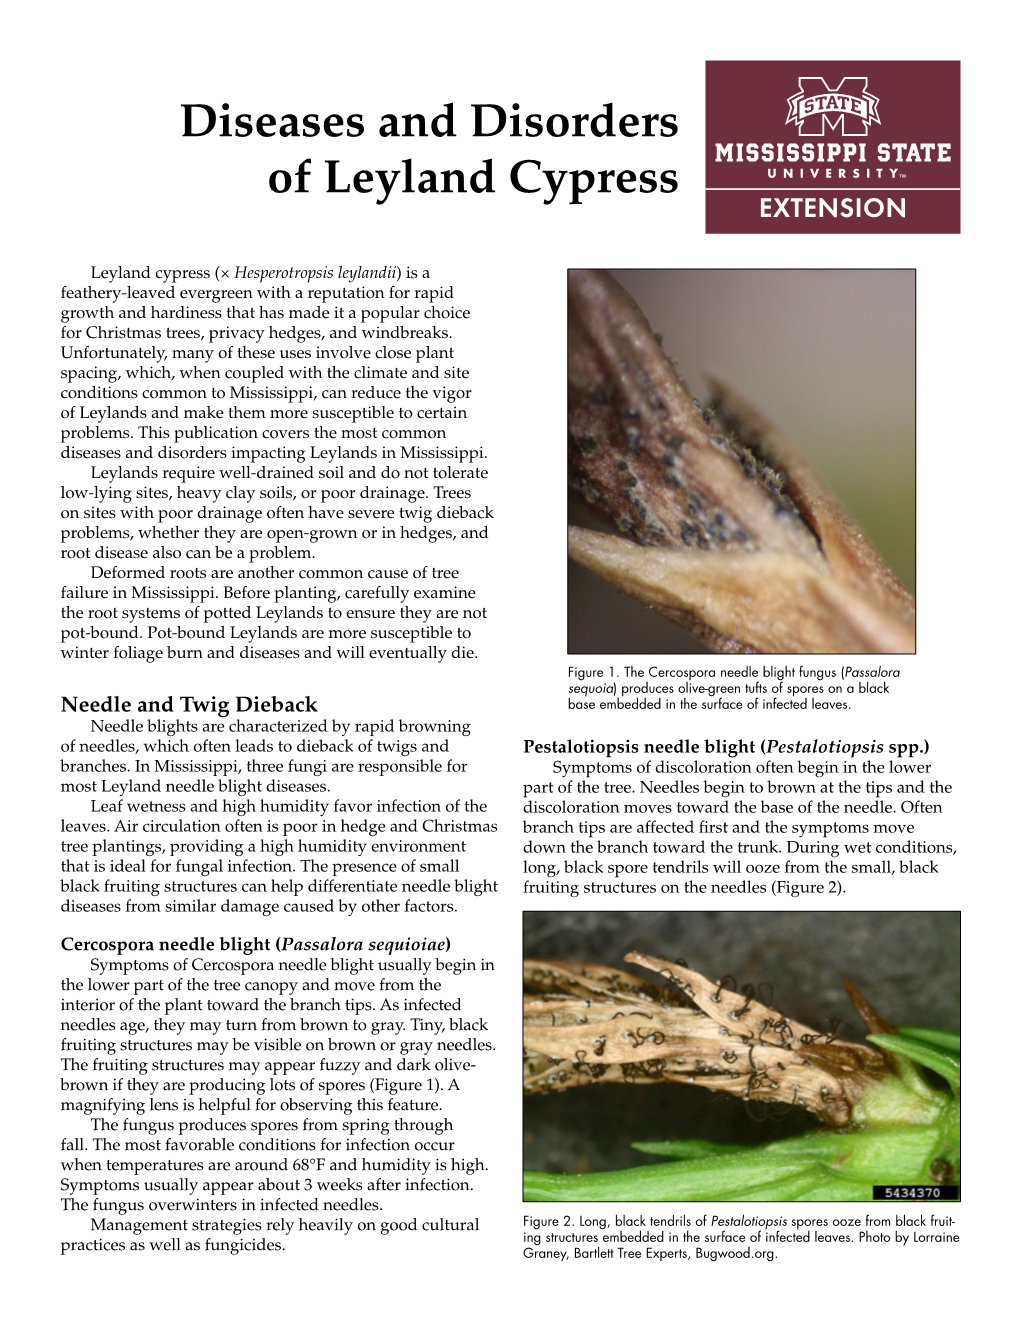 Diseases and Disorders of Leyland Cypress